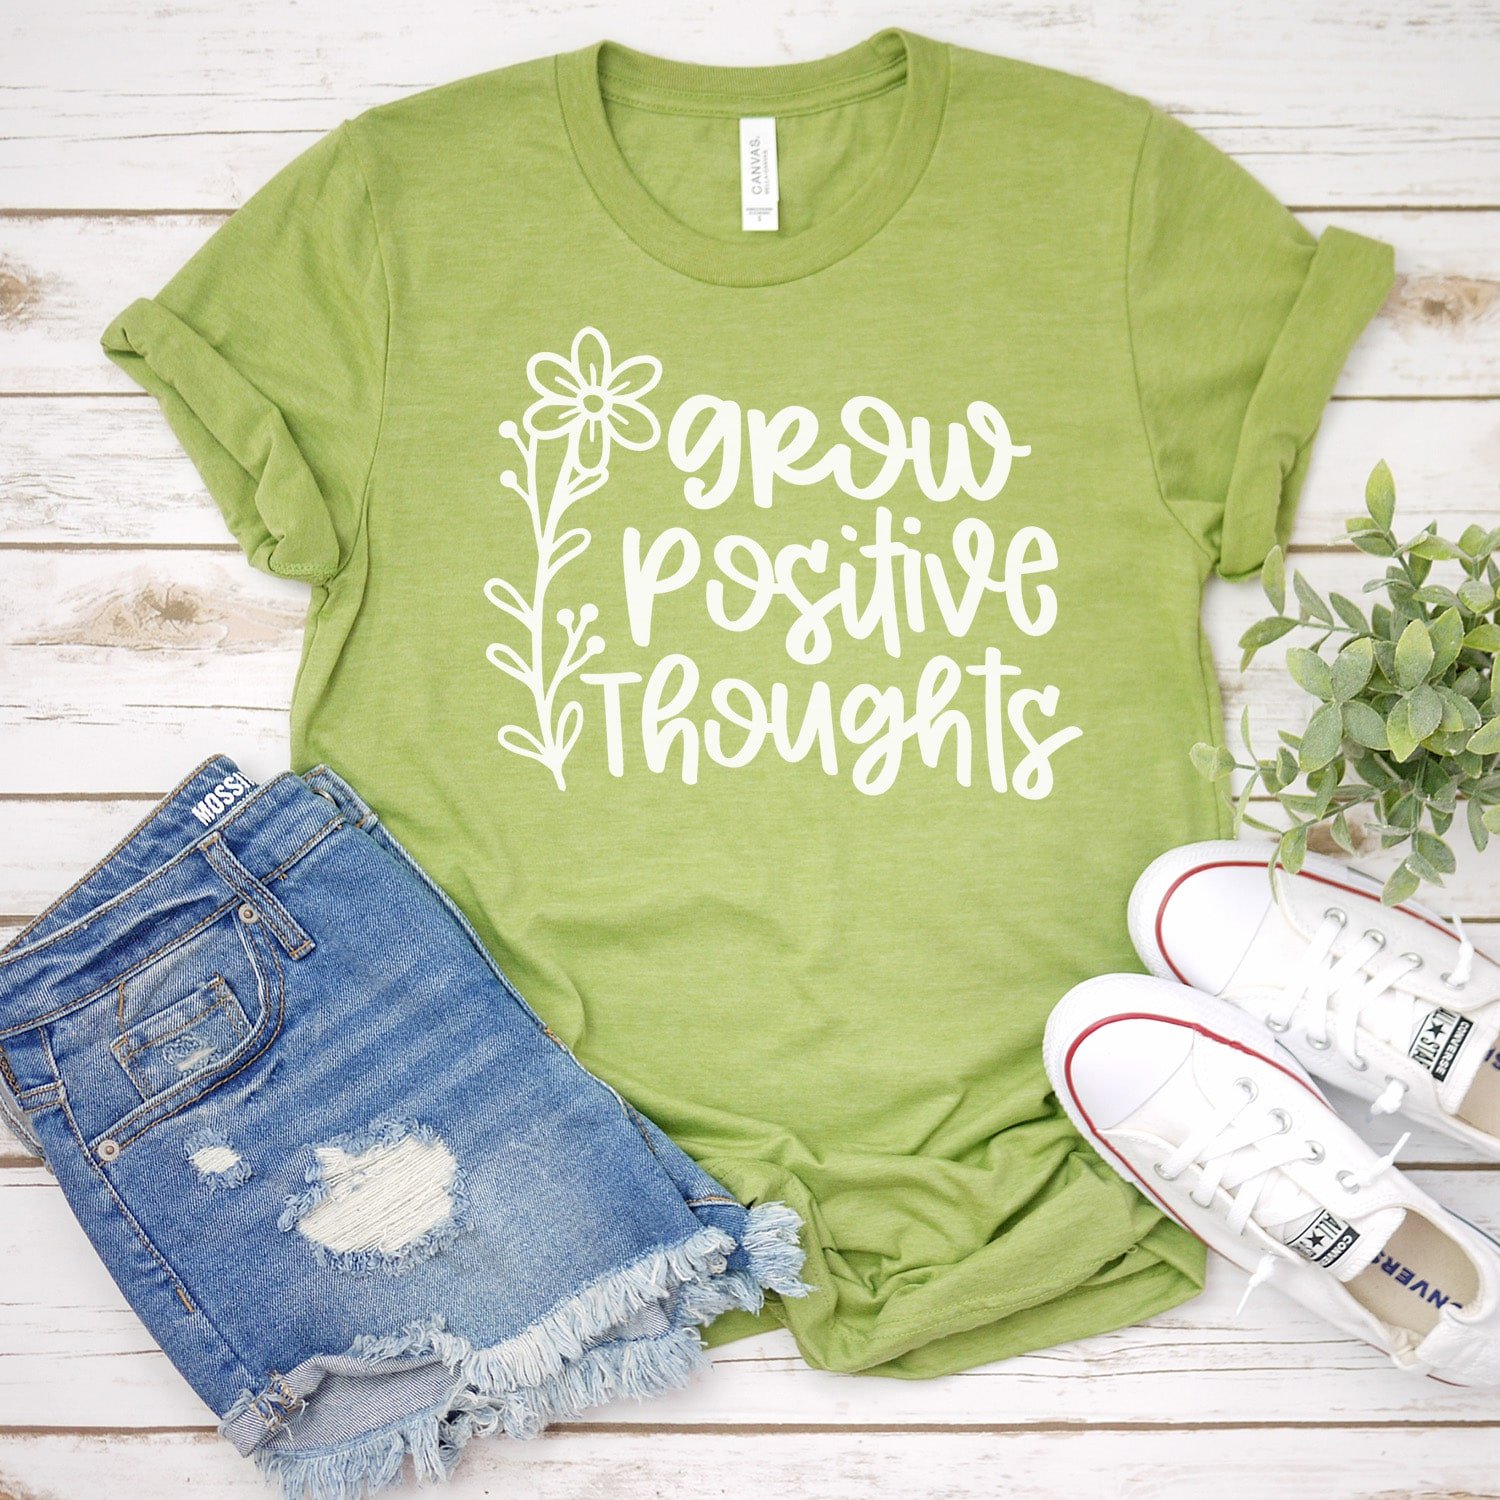 Green t-shirt featuring grow positive thoughts message across front, with white shoes and blue jean shorts 